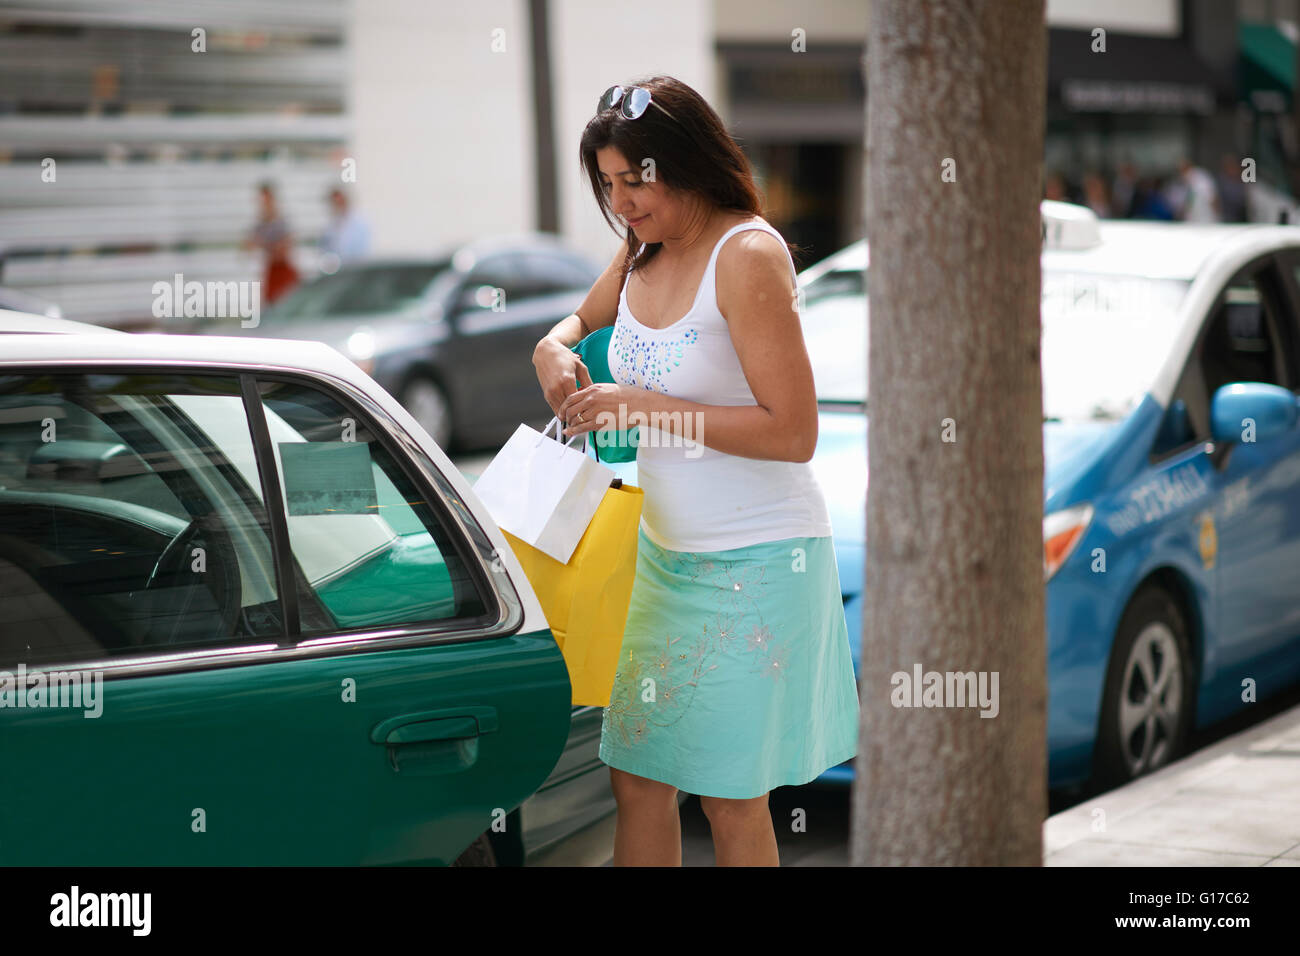 Woman sitting with shopping bags struggling to get into taxi, Los Angeles, California, USA Stock Photo